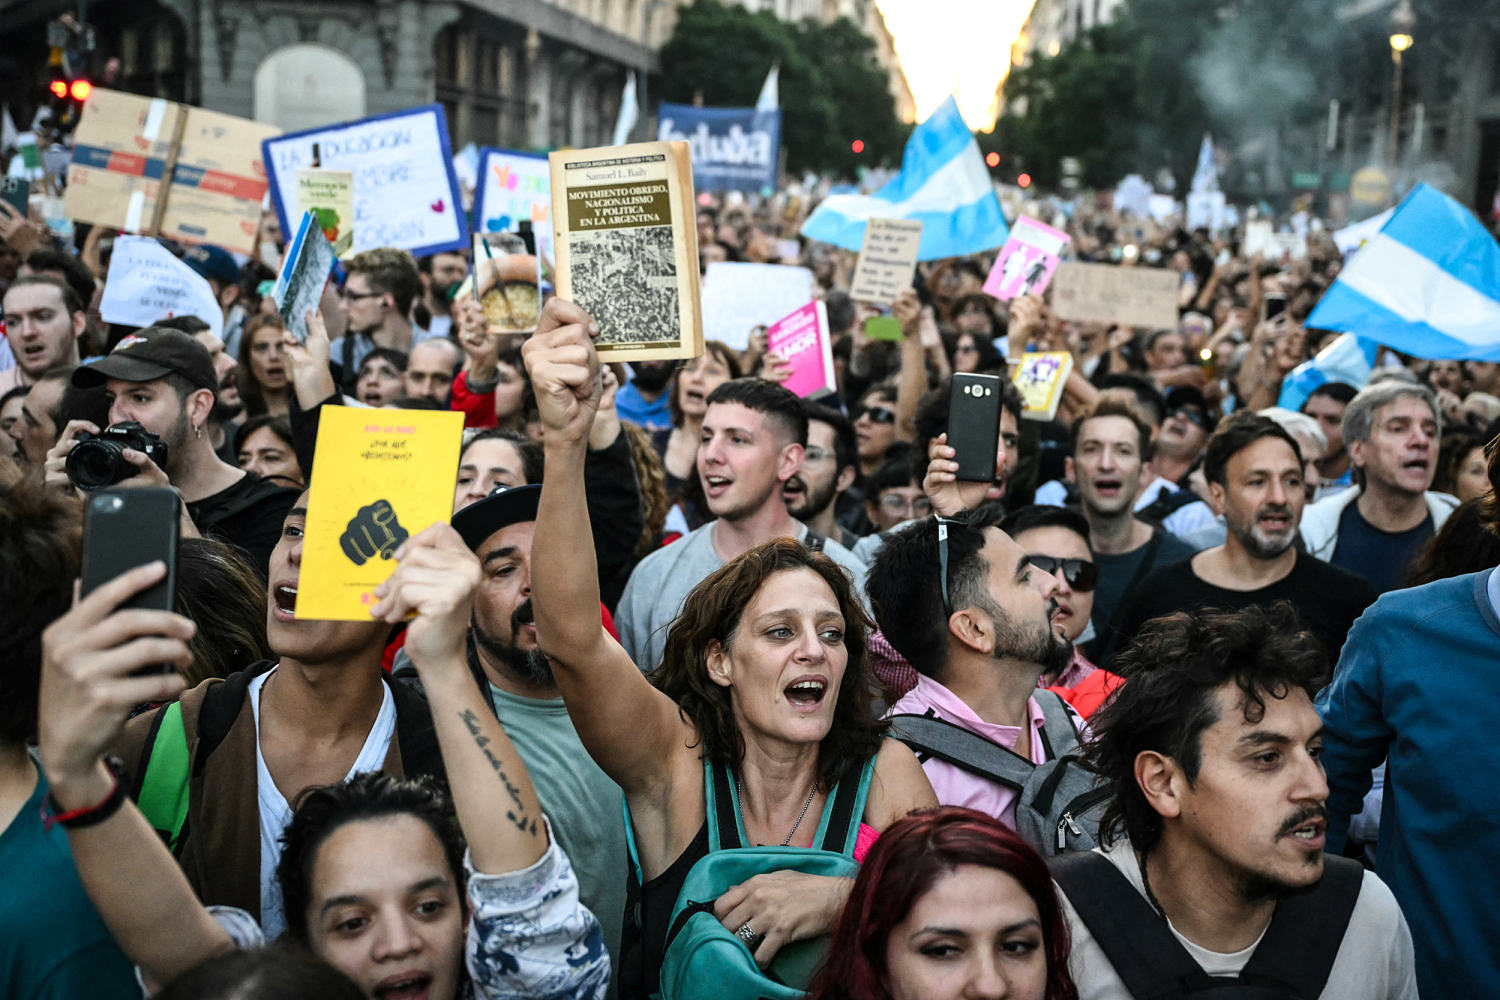 Argentine students and professors protest university budget cuts under Milei